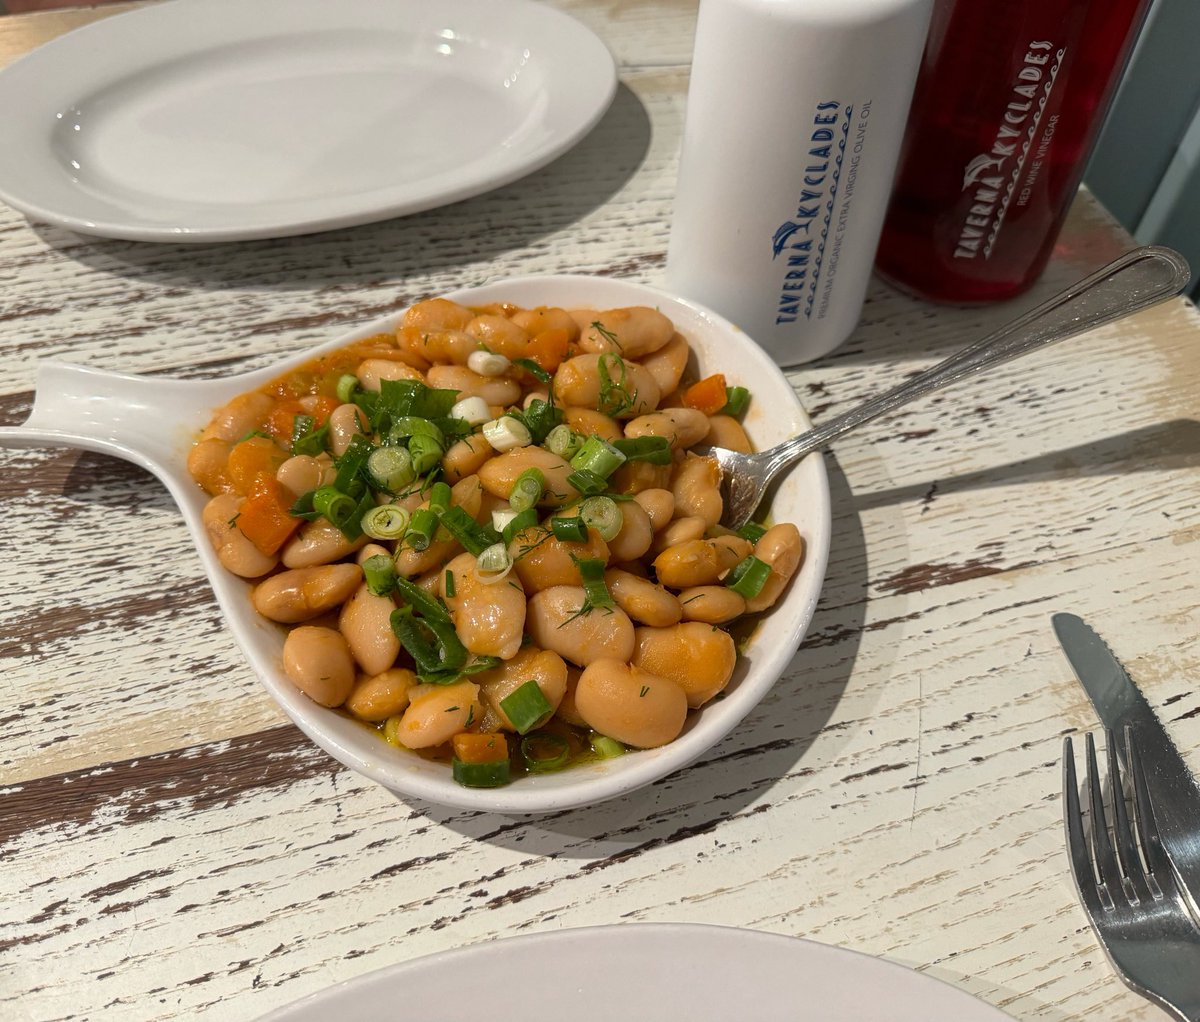 Gigantes energy! Our Lima Beans in tomato sauce. 

#tavernakyclades #limabeans #dishes #greek #appetizers #yummy #healthy #restaurants #greekfood #foodies #greekrestaurant #recipeshare #queensny #baysidequeens #astoriaqueens